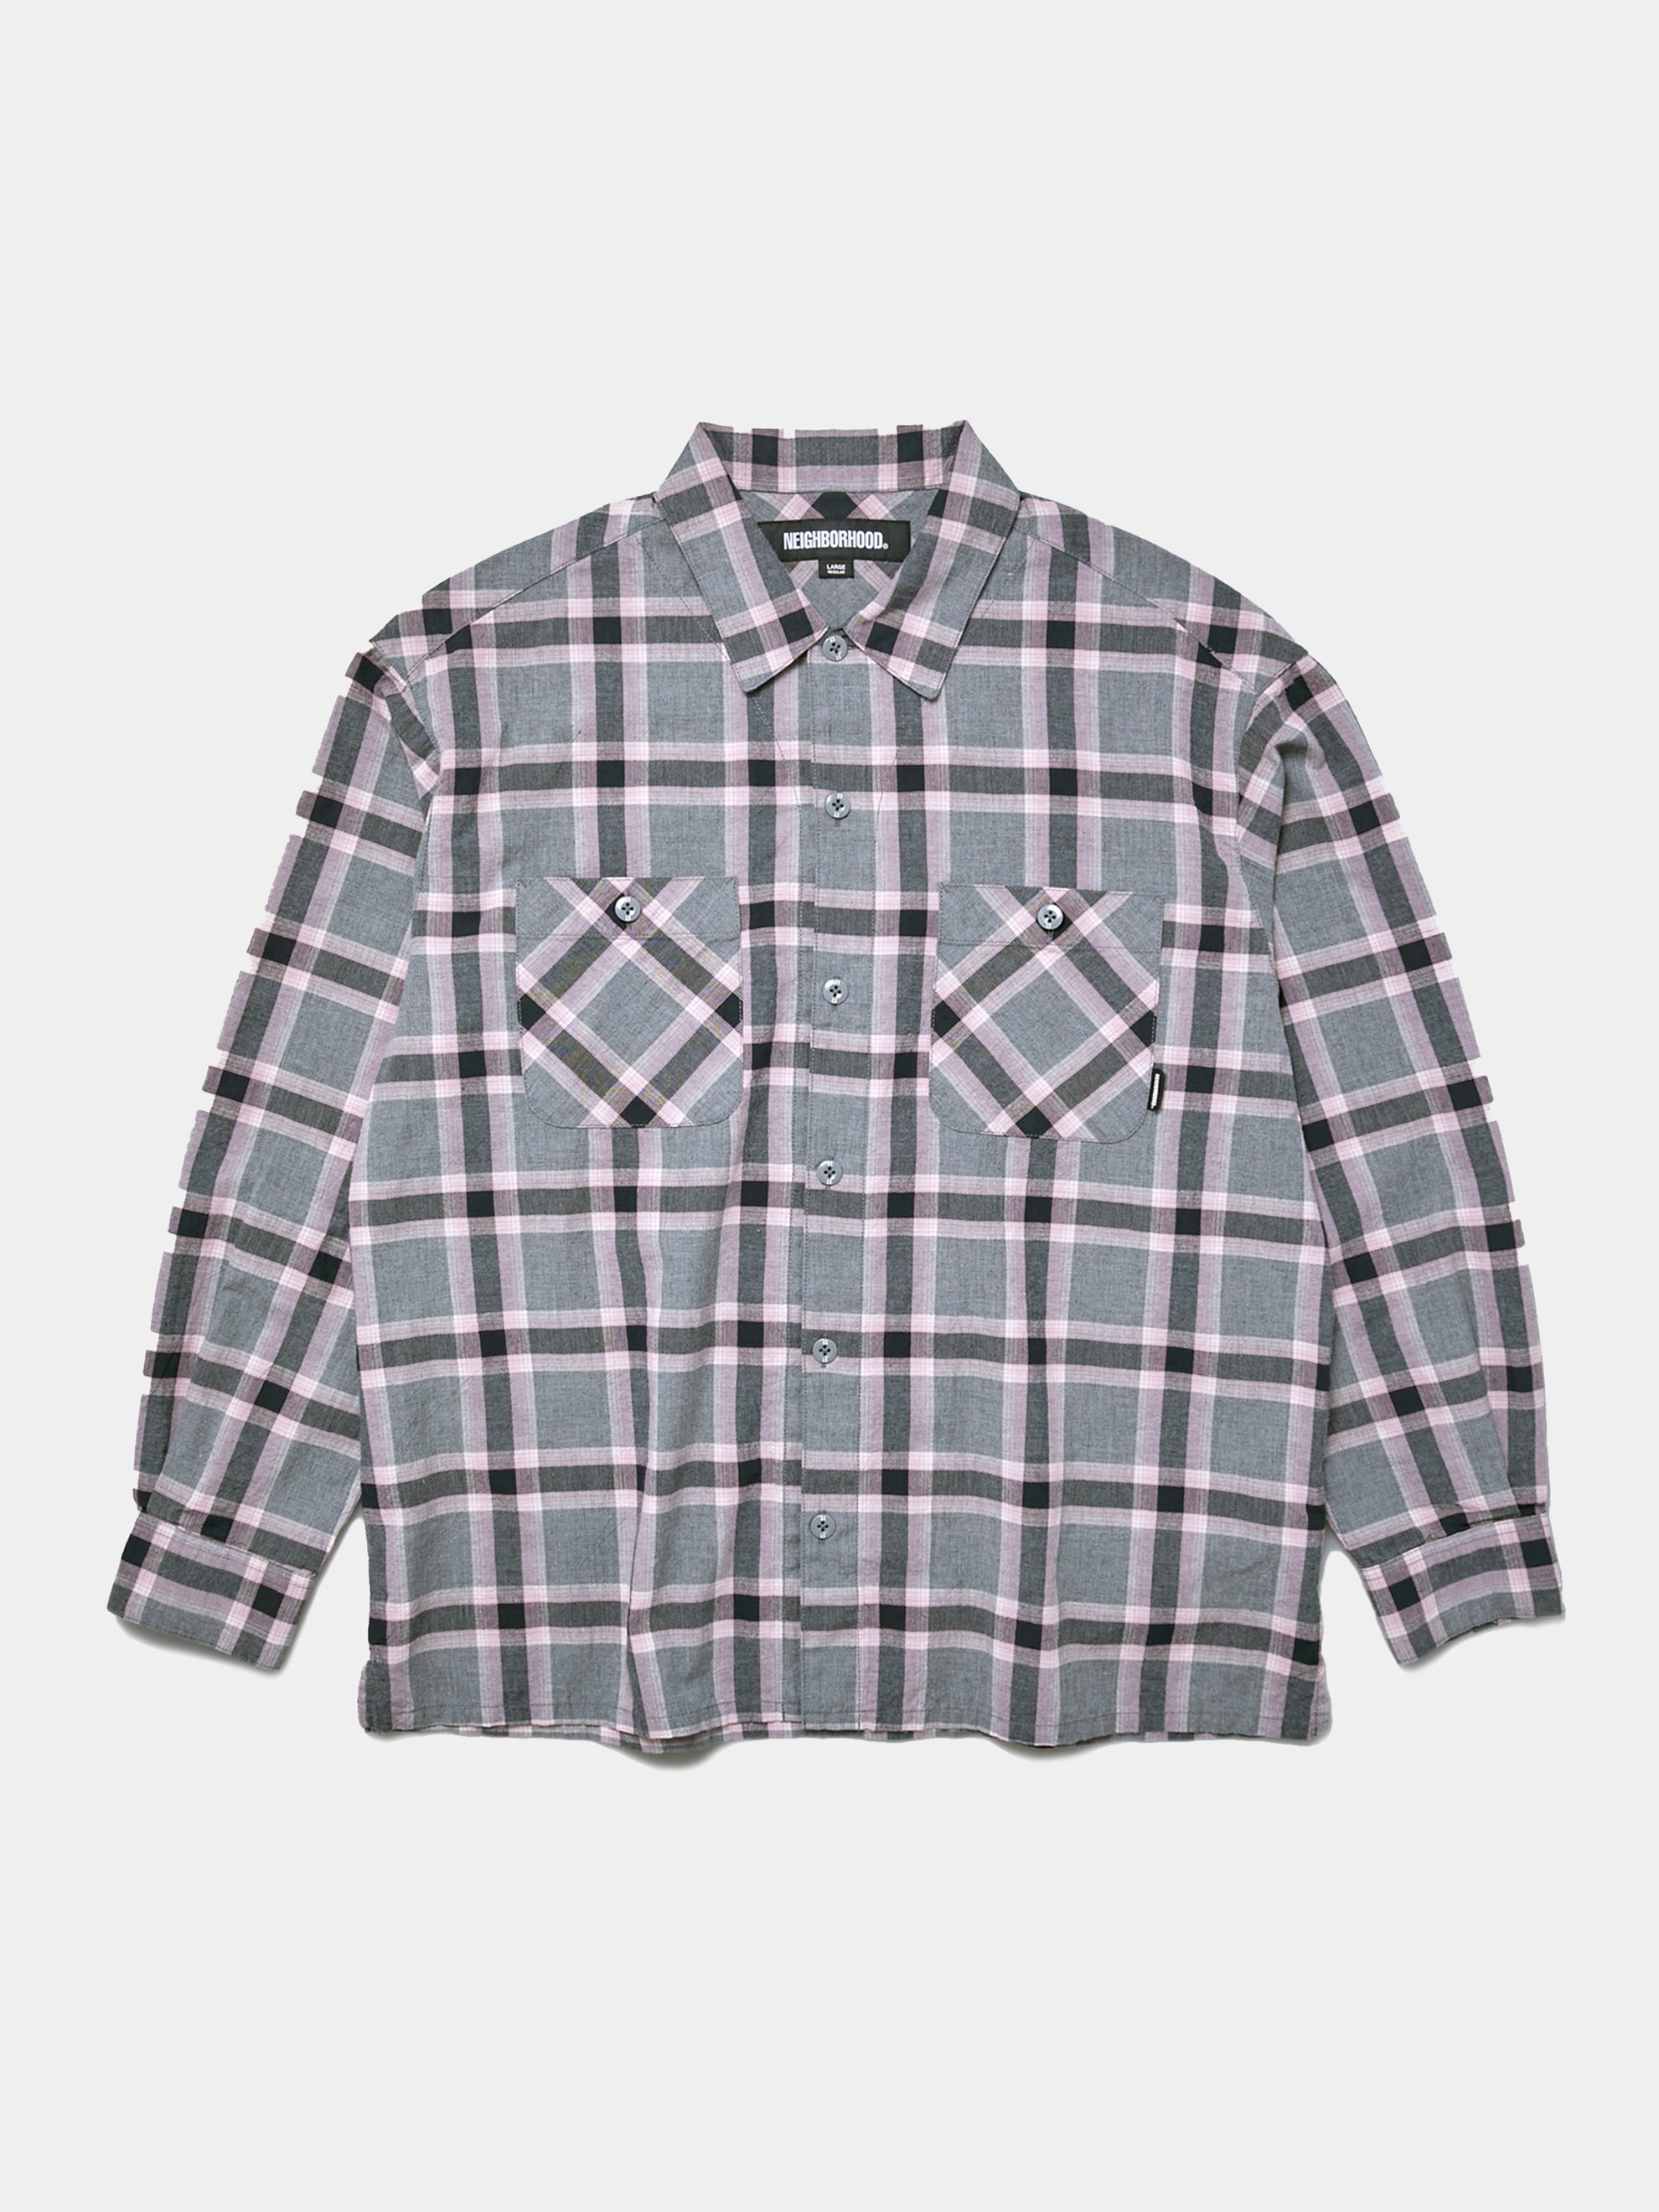 Buy Neighborhood NEONCHECK SHIRT LS (Pink) Online at UNION LOS ANGELES